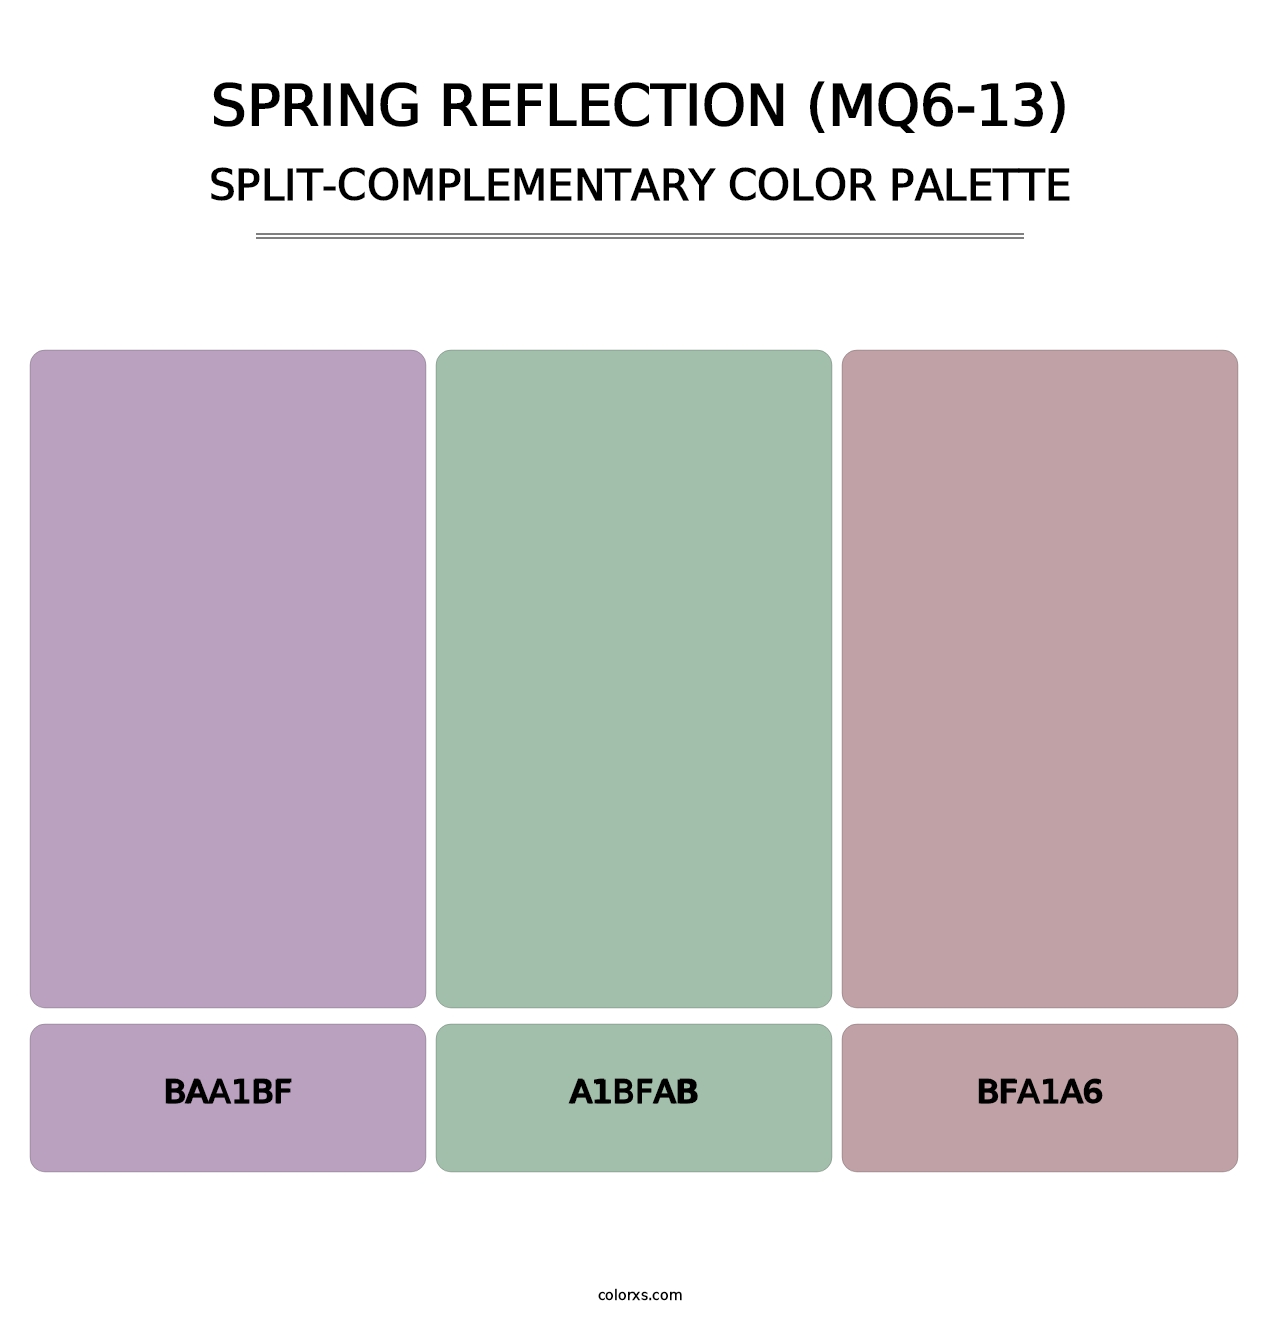 Spring Reflection (MQ6-13) - Split-Complementary Color Palette